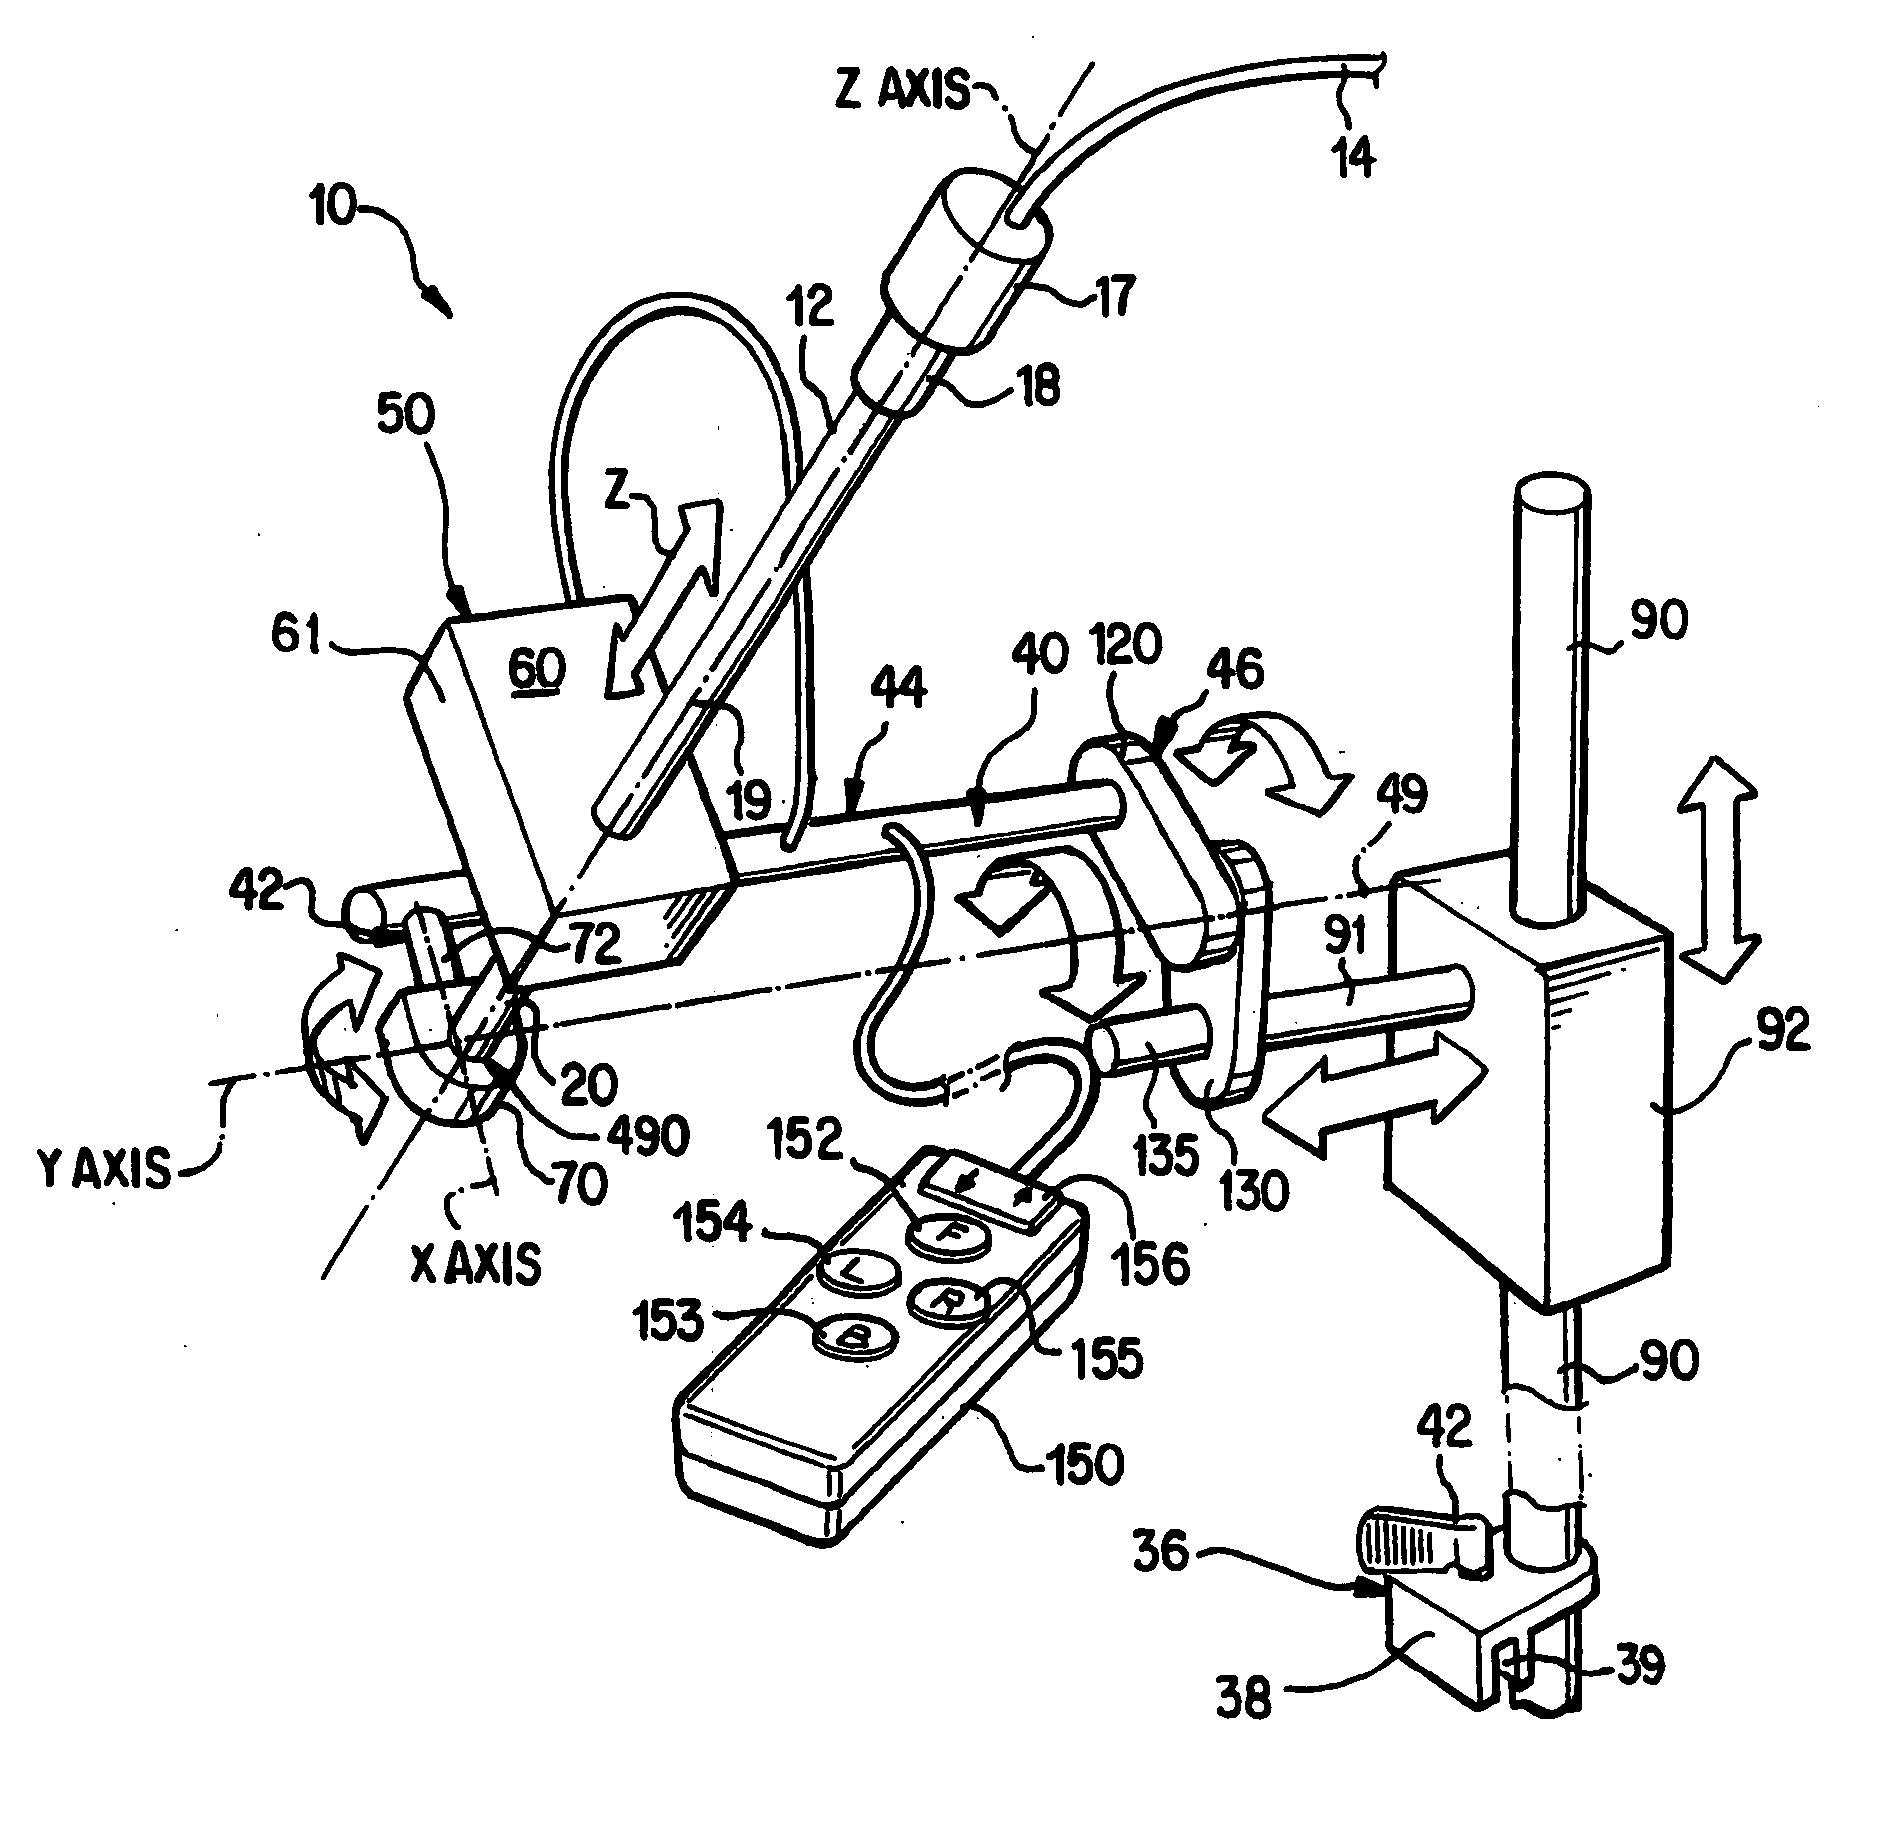 Apparatus for positioning a medical instrument